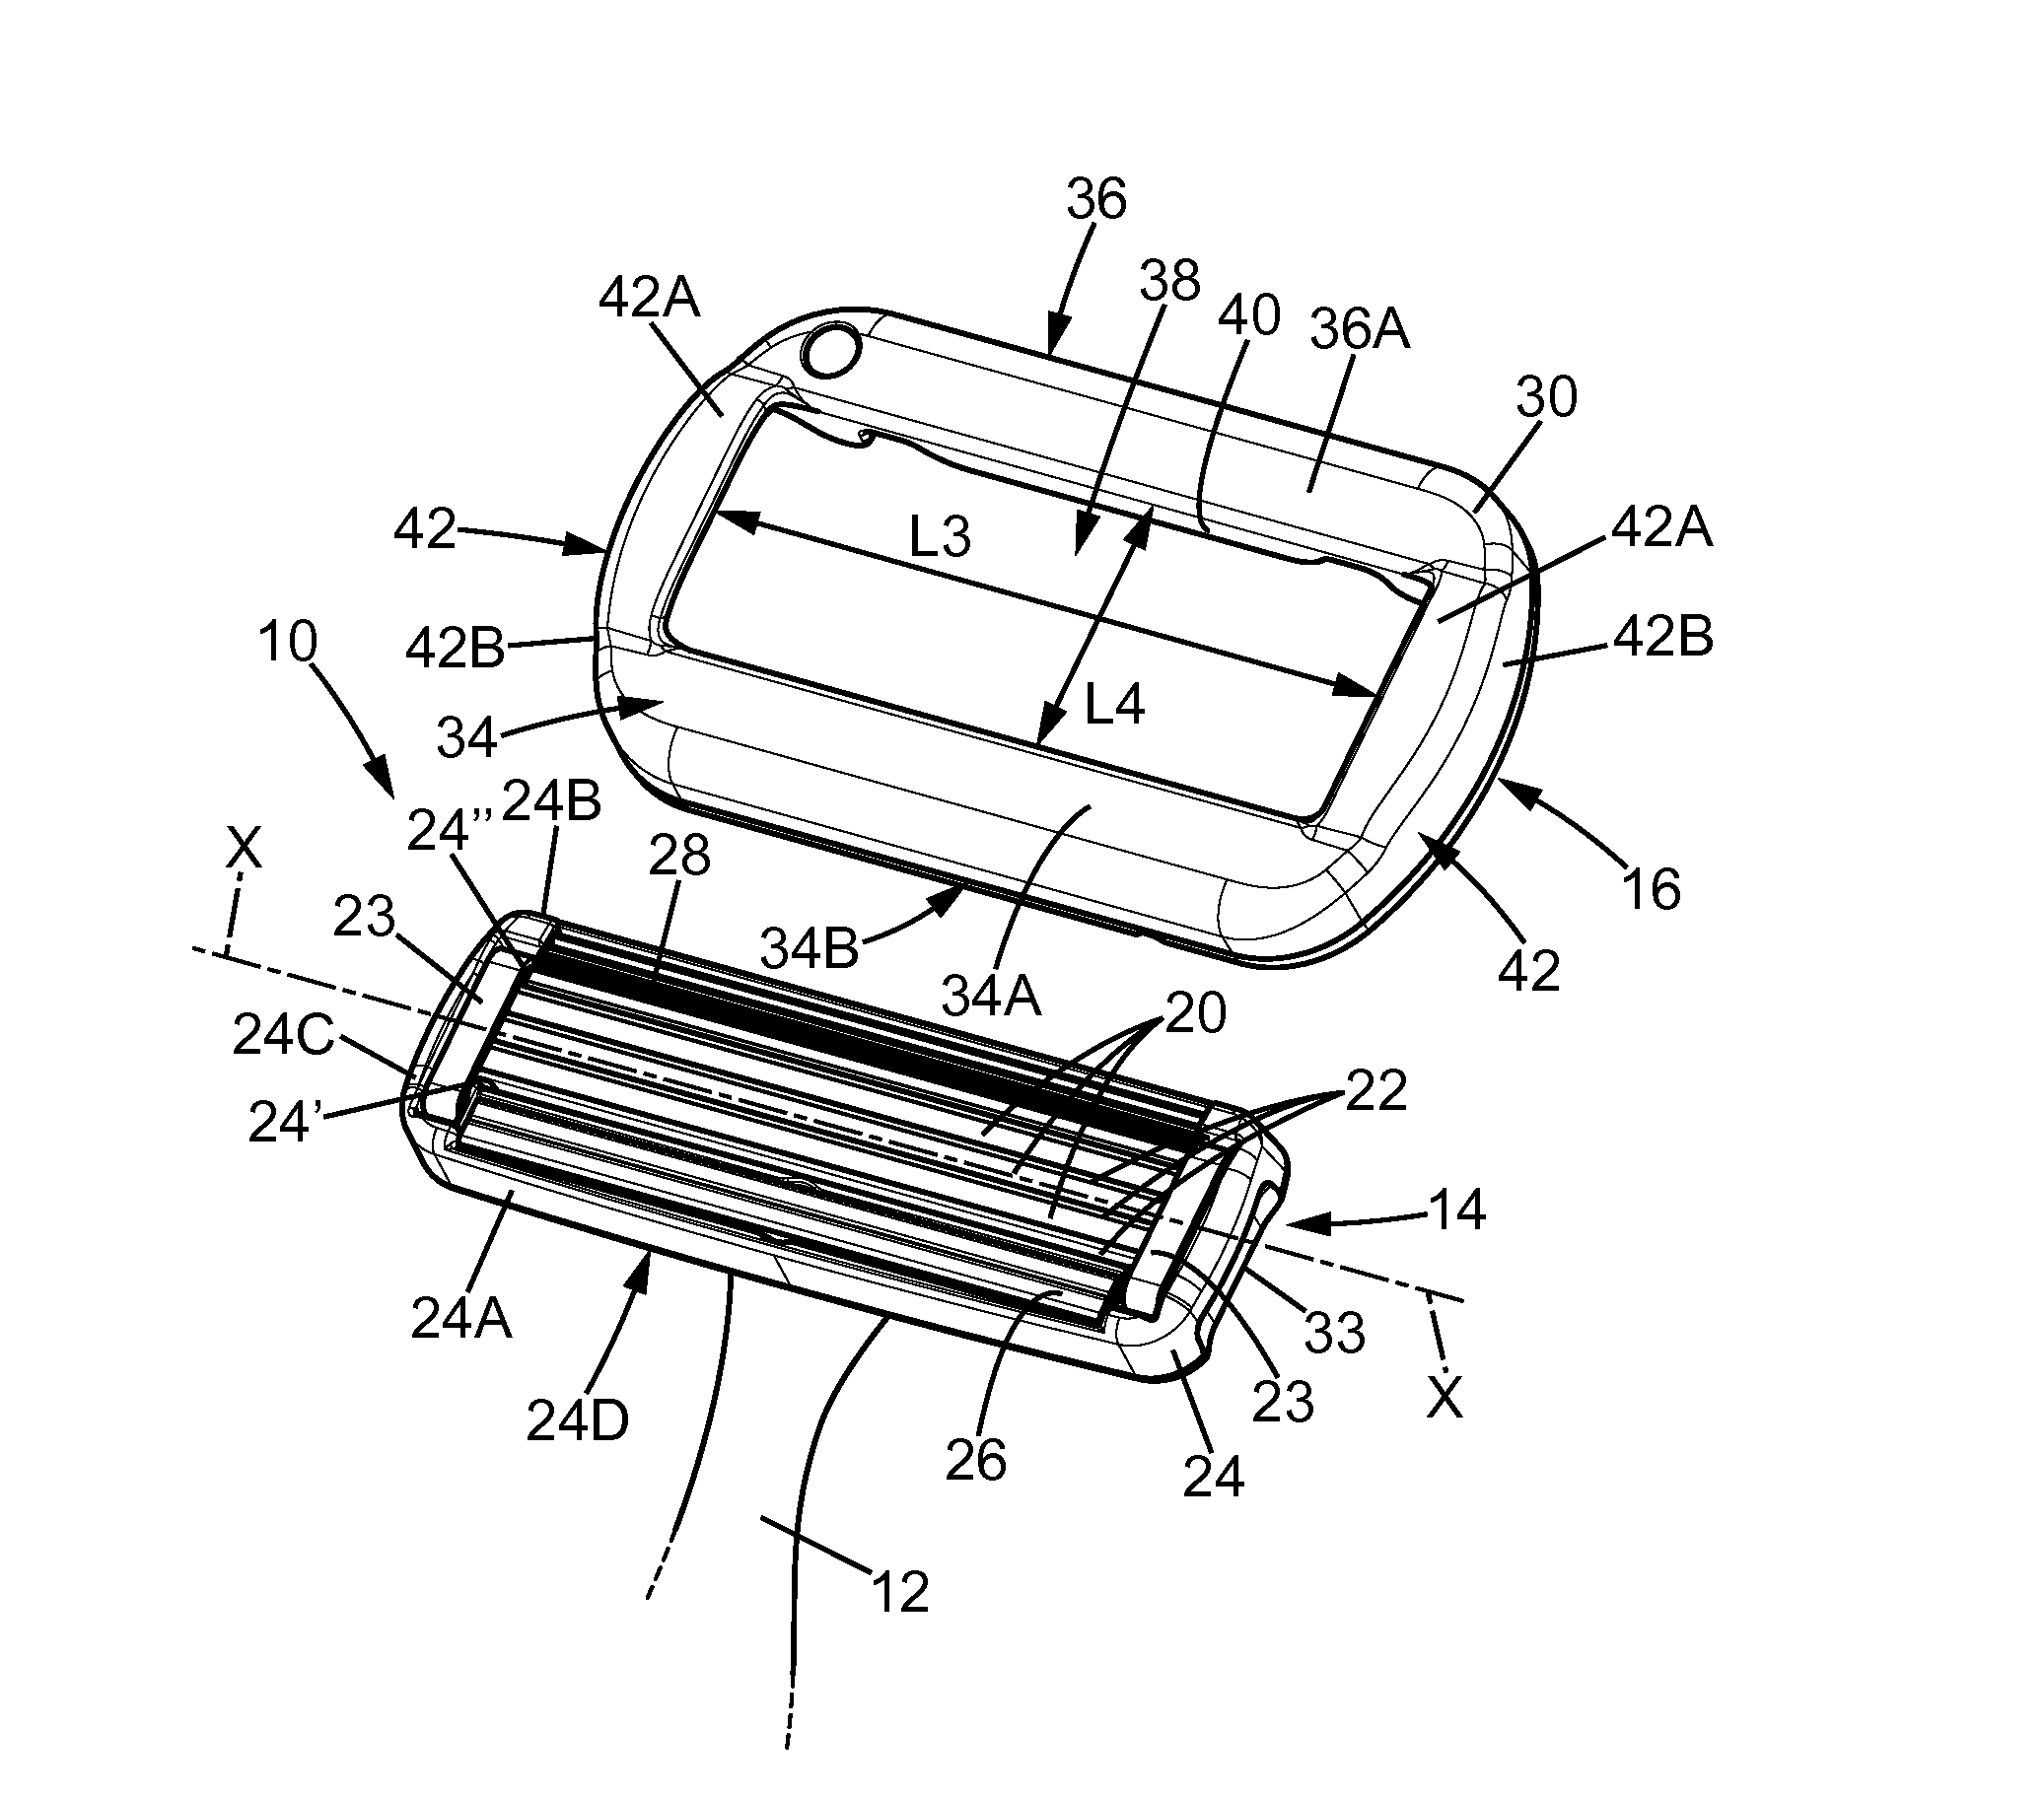 Shaving blade assembly with a blade unit and a skin contact member